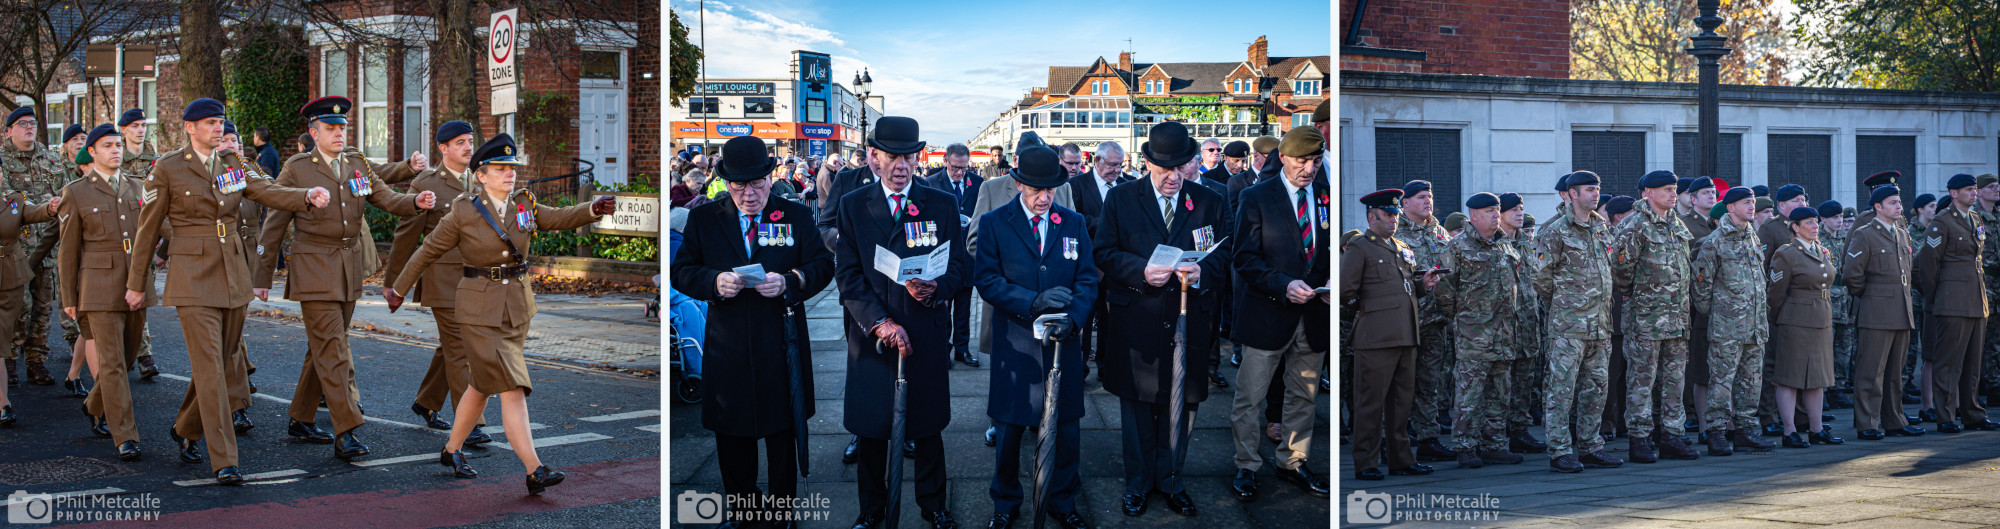 Veterans, members of the armed forces, and civic dignitaries at the Remembrance Sunday event